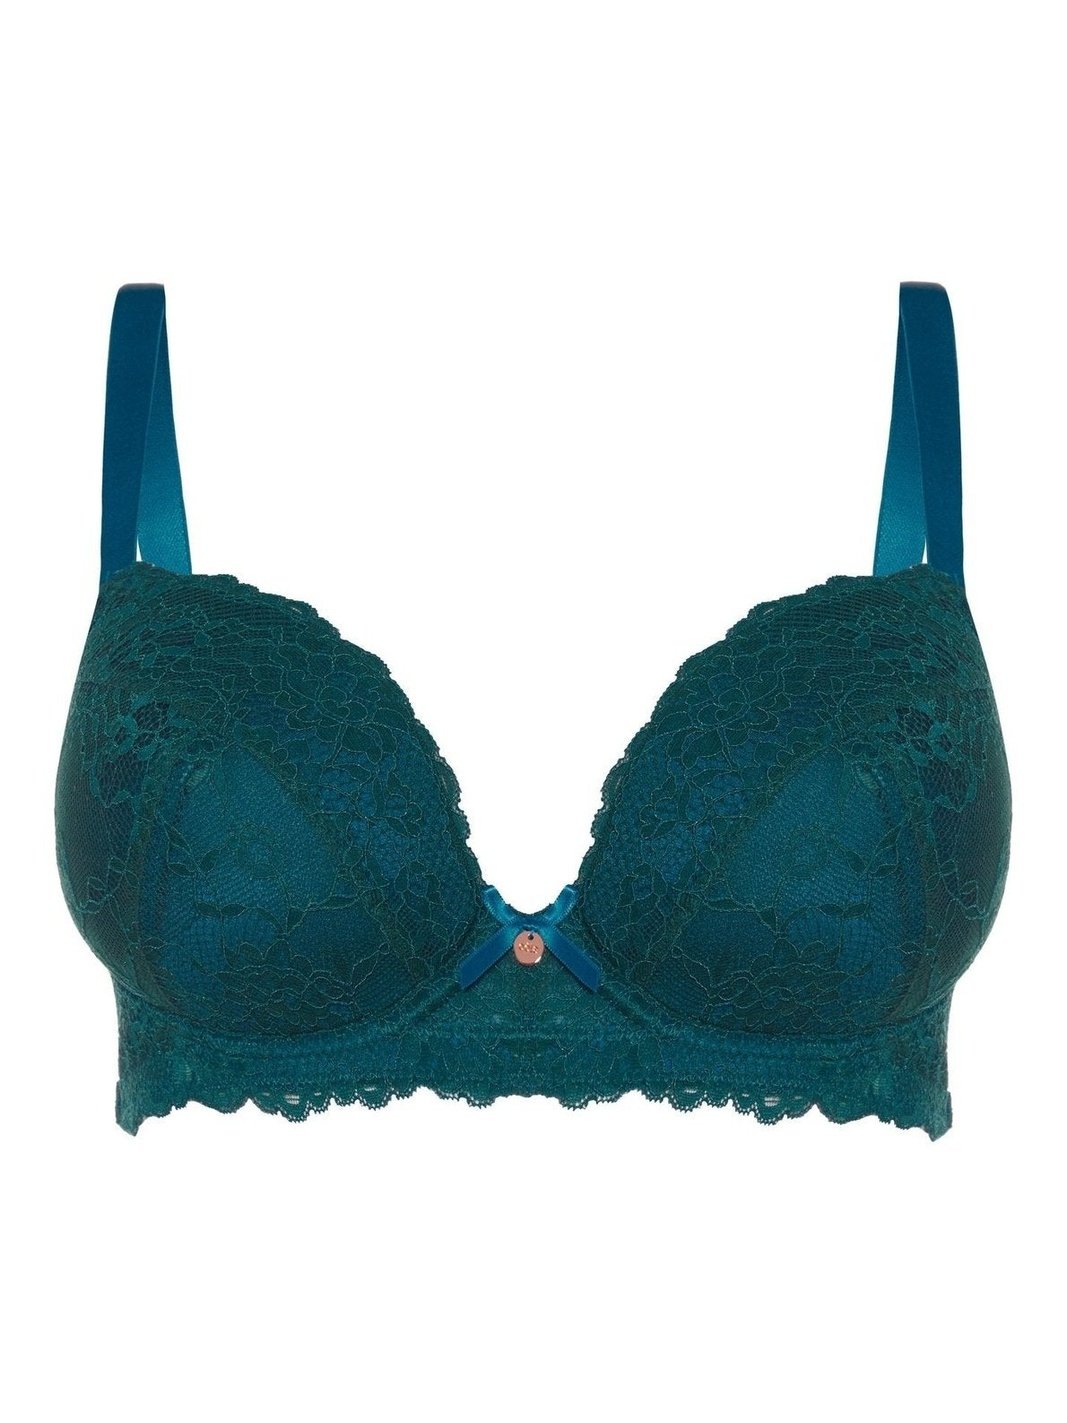 Tonal Lace Padded Plunge Bra in Emerald & Teal - Exquisite